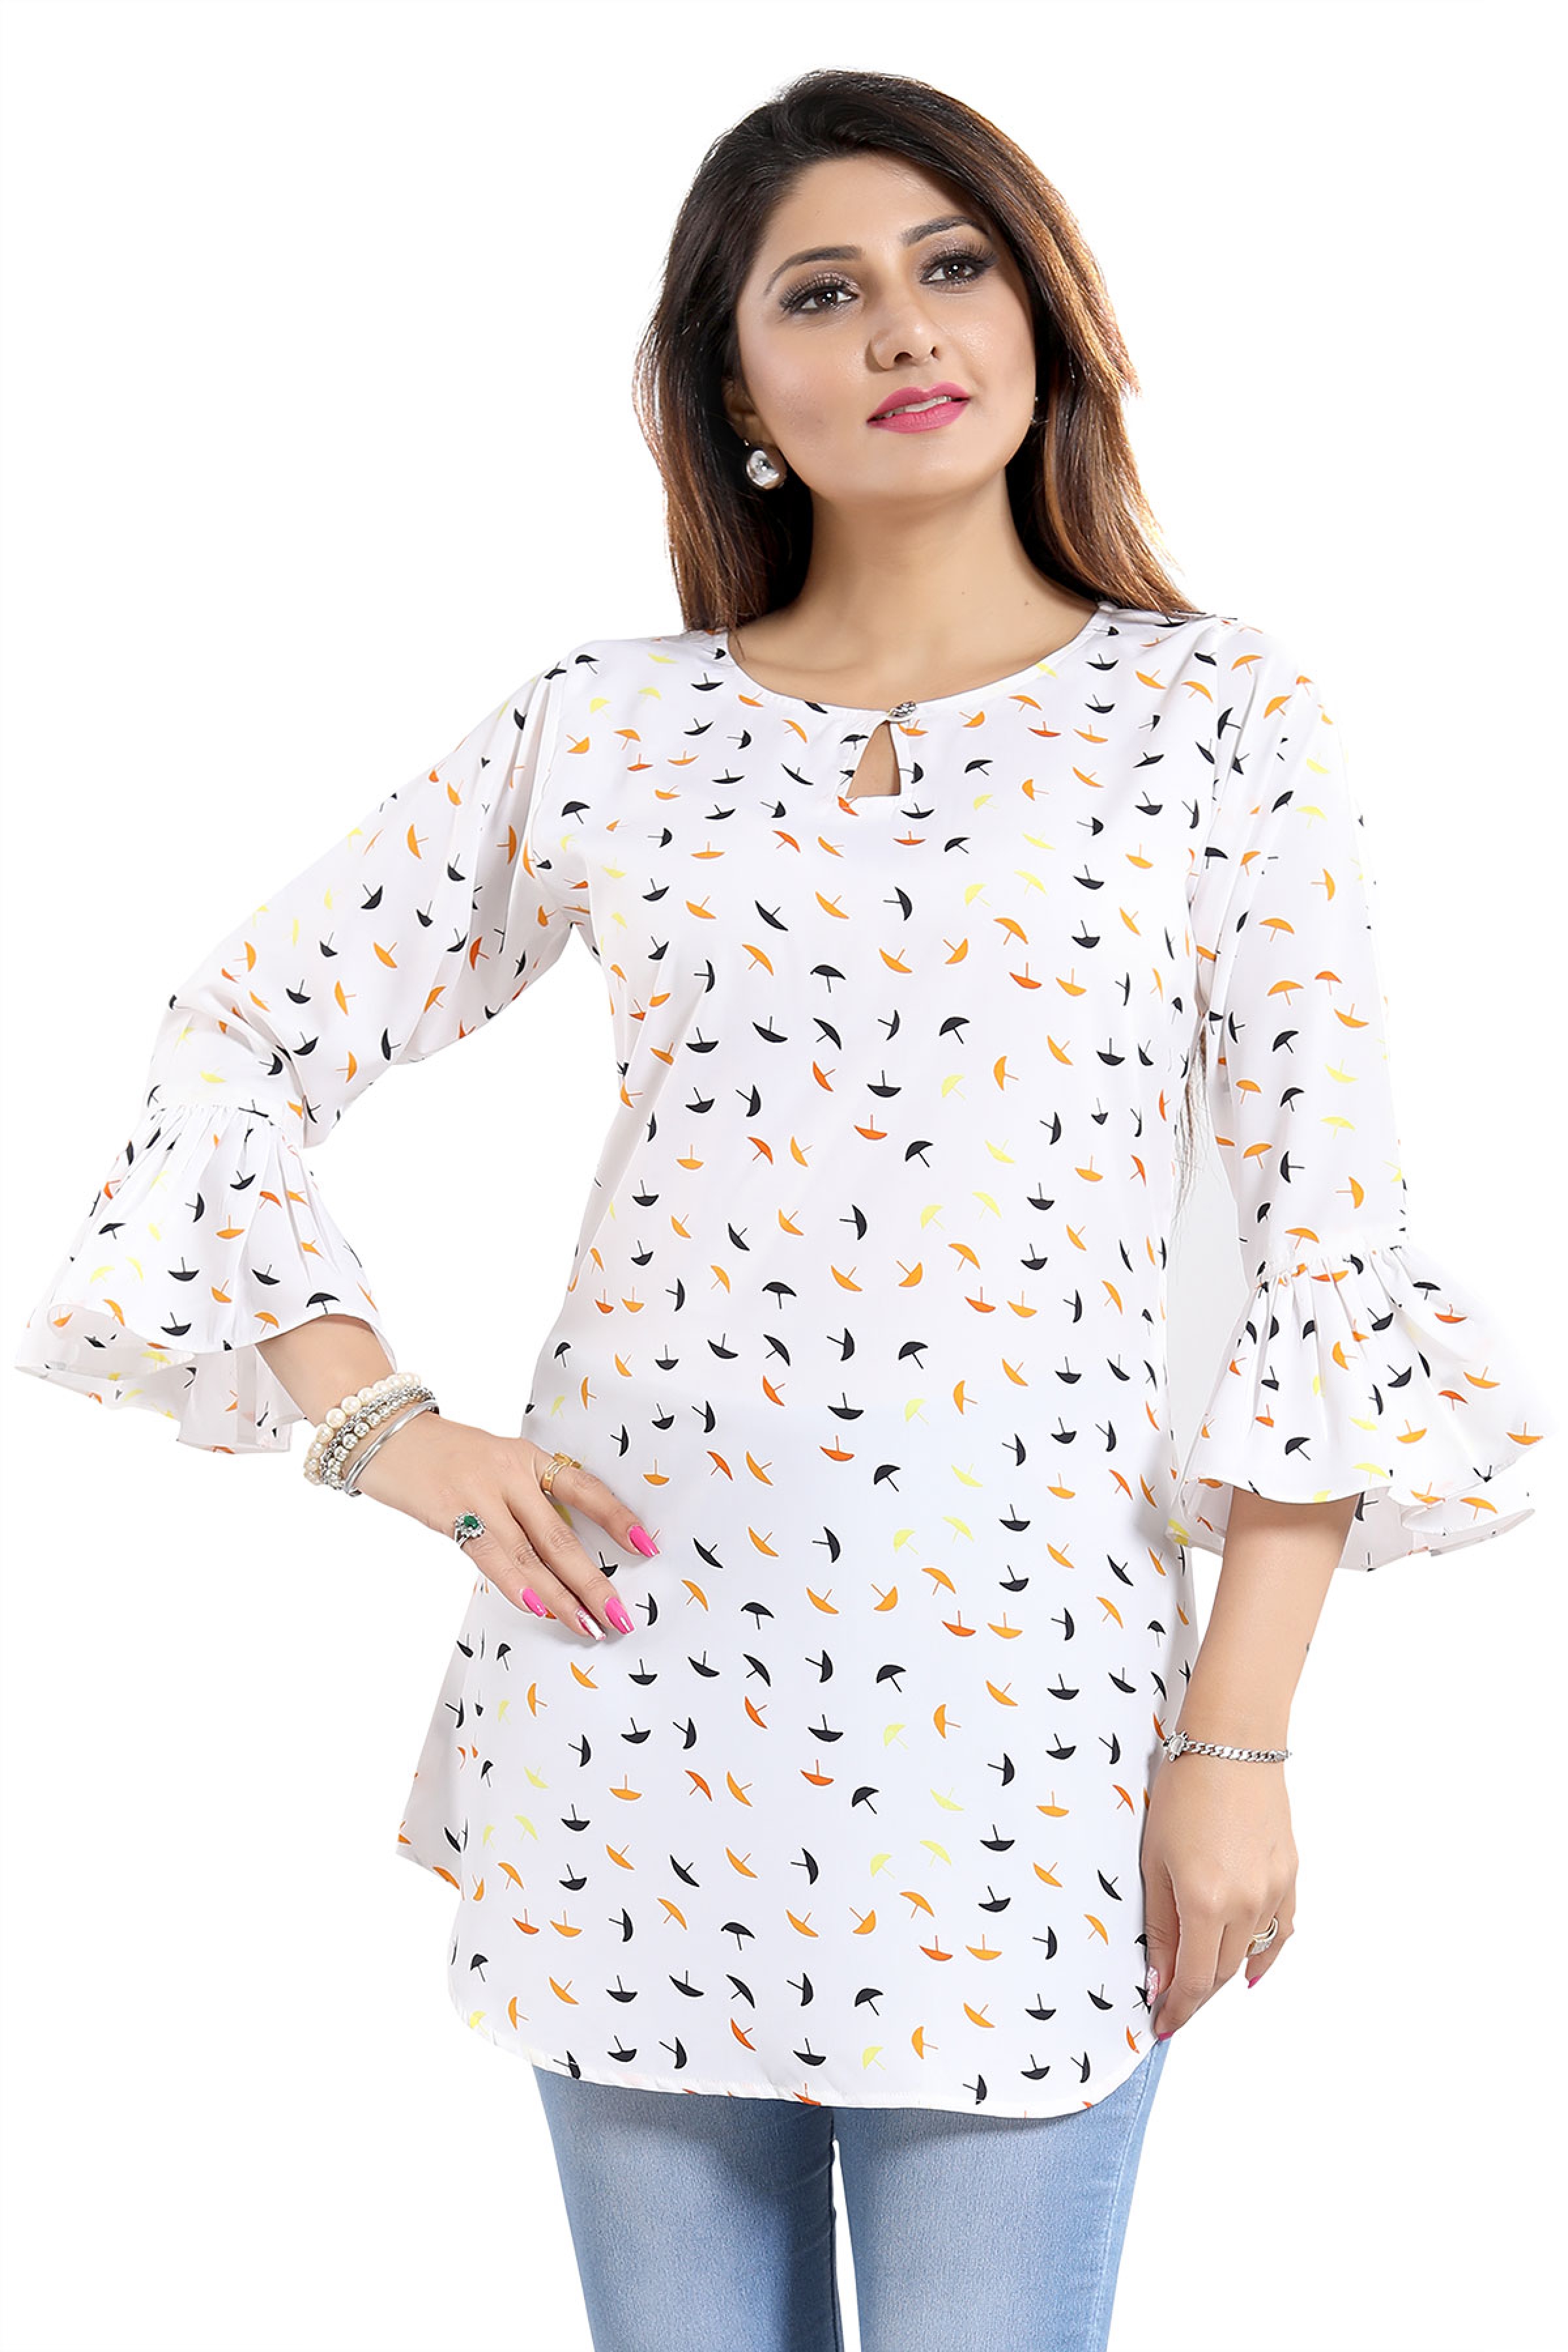 8 Trending Kurti Sleeves Designs That You Need To Try In 2019  Lets Get  Dressed